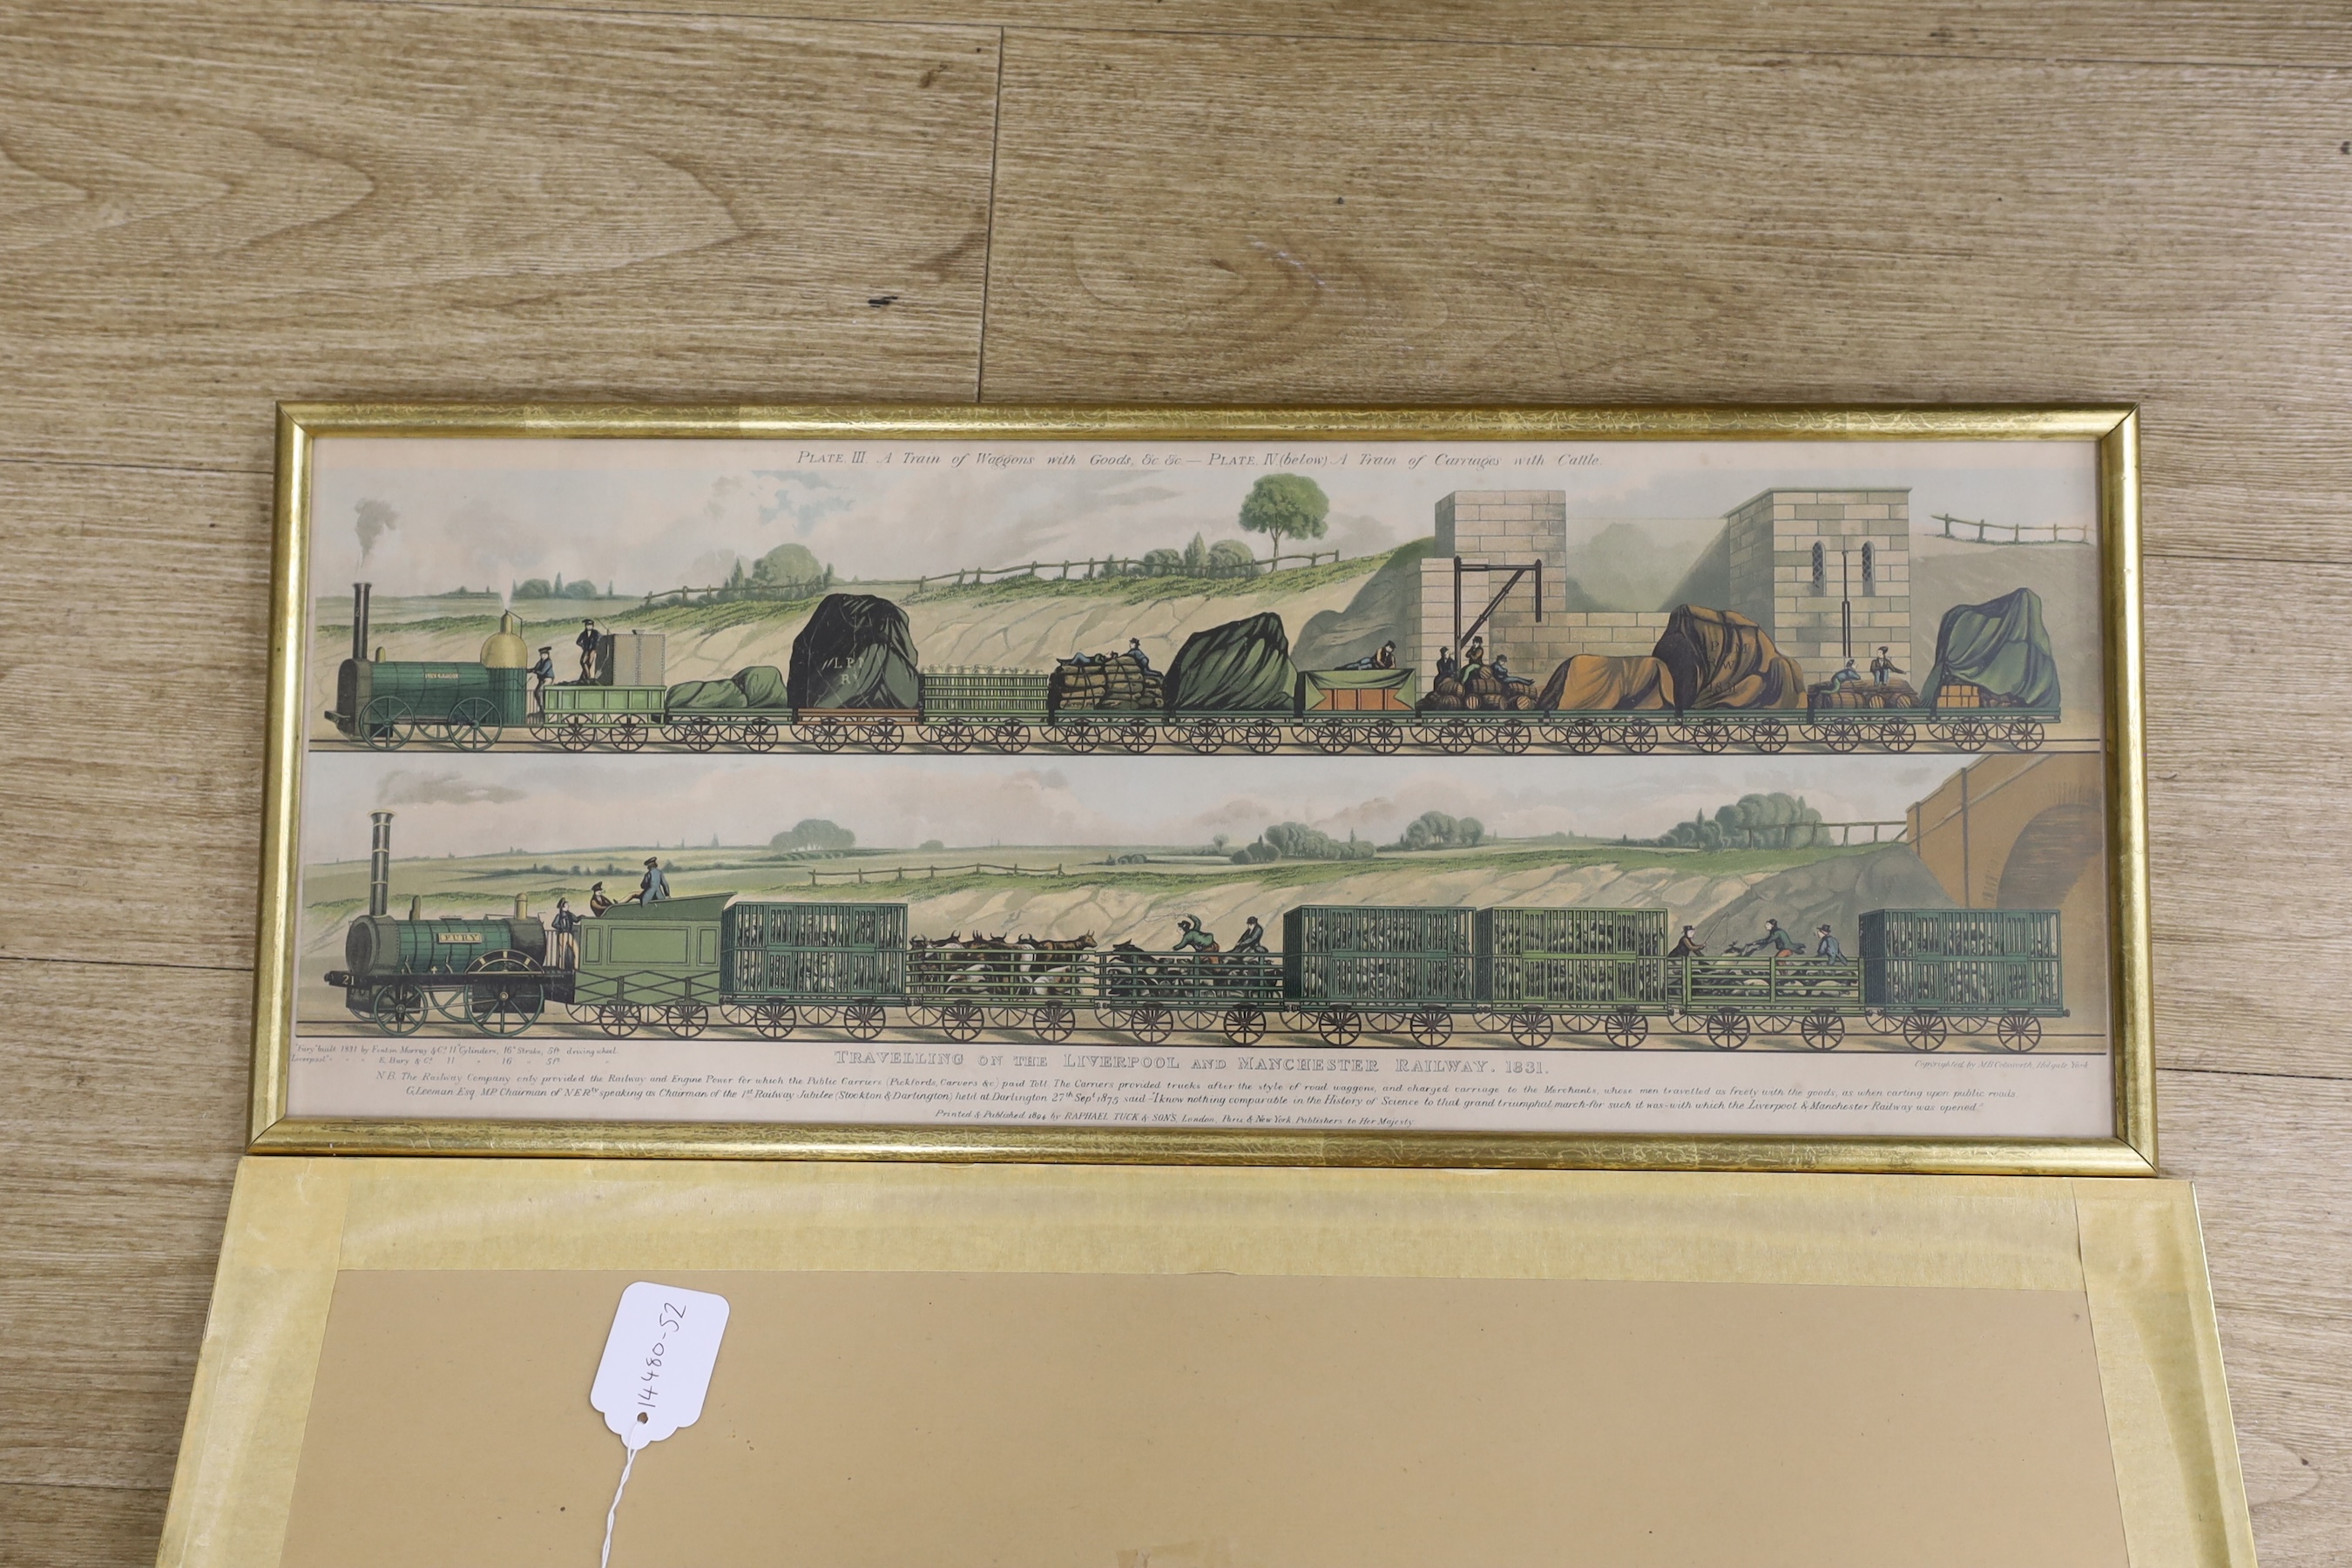 A pair of 19th century railway interest chromolithographs, ‘Travelling on the Liverpool and Manchester Railway, 1831’, publ. 1894 by Raphael Tuck & Sons, 24.5 x 64cm. Condition - fair